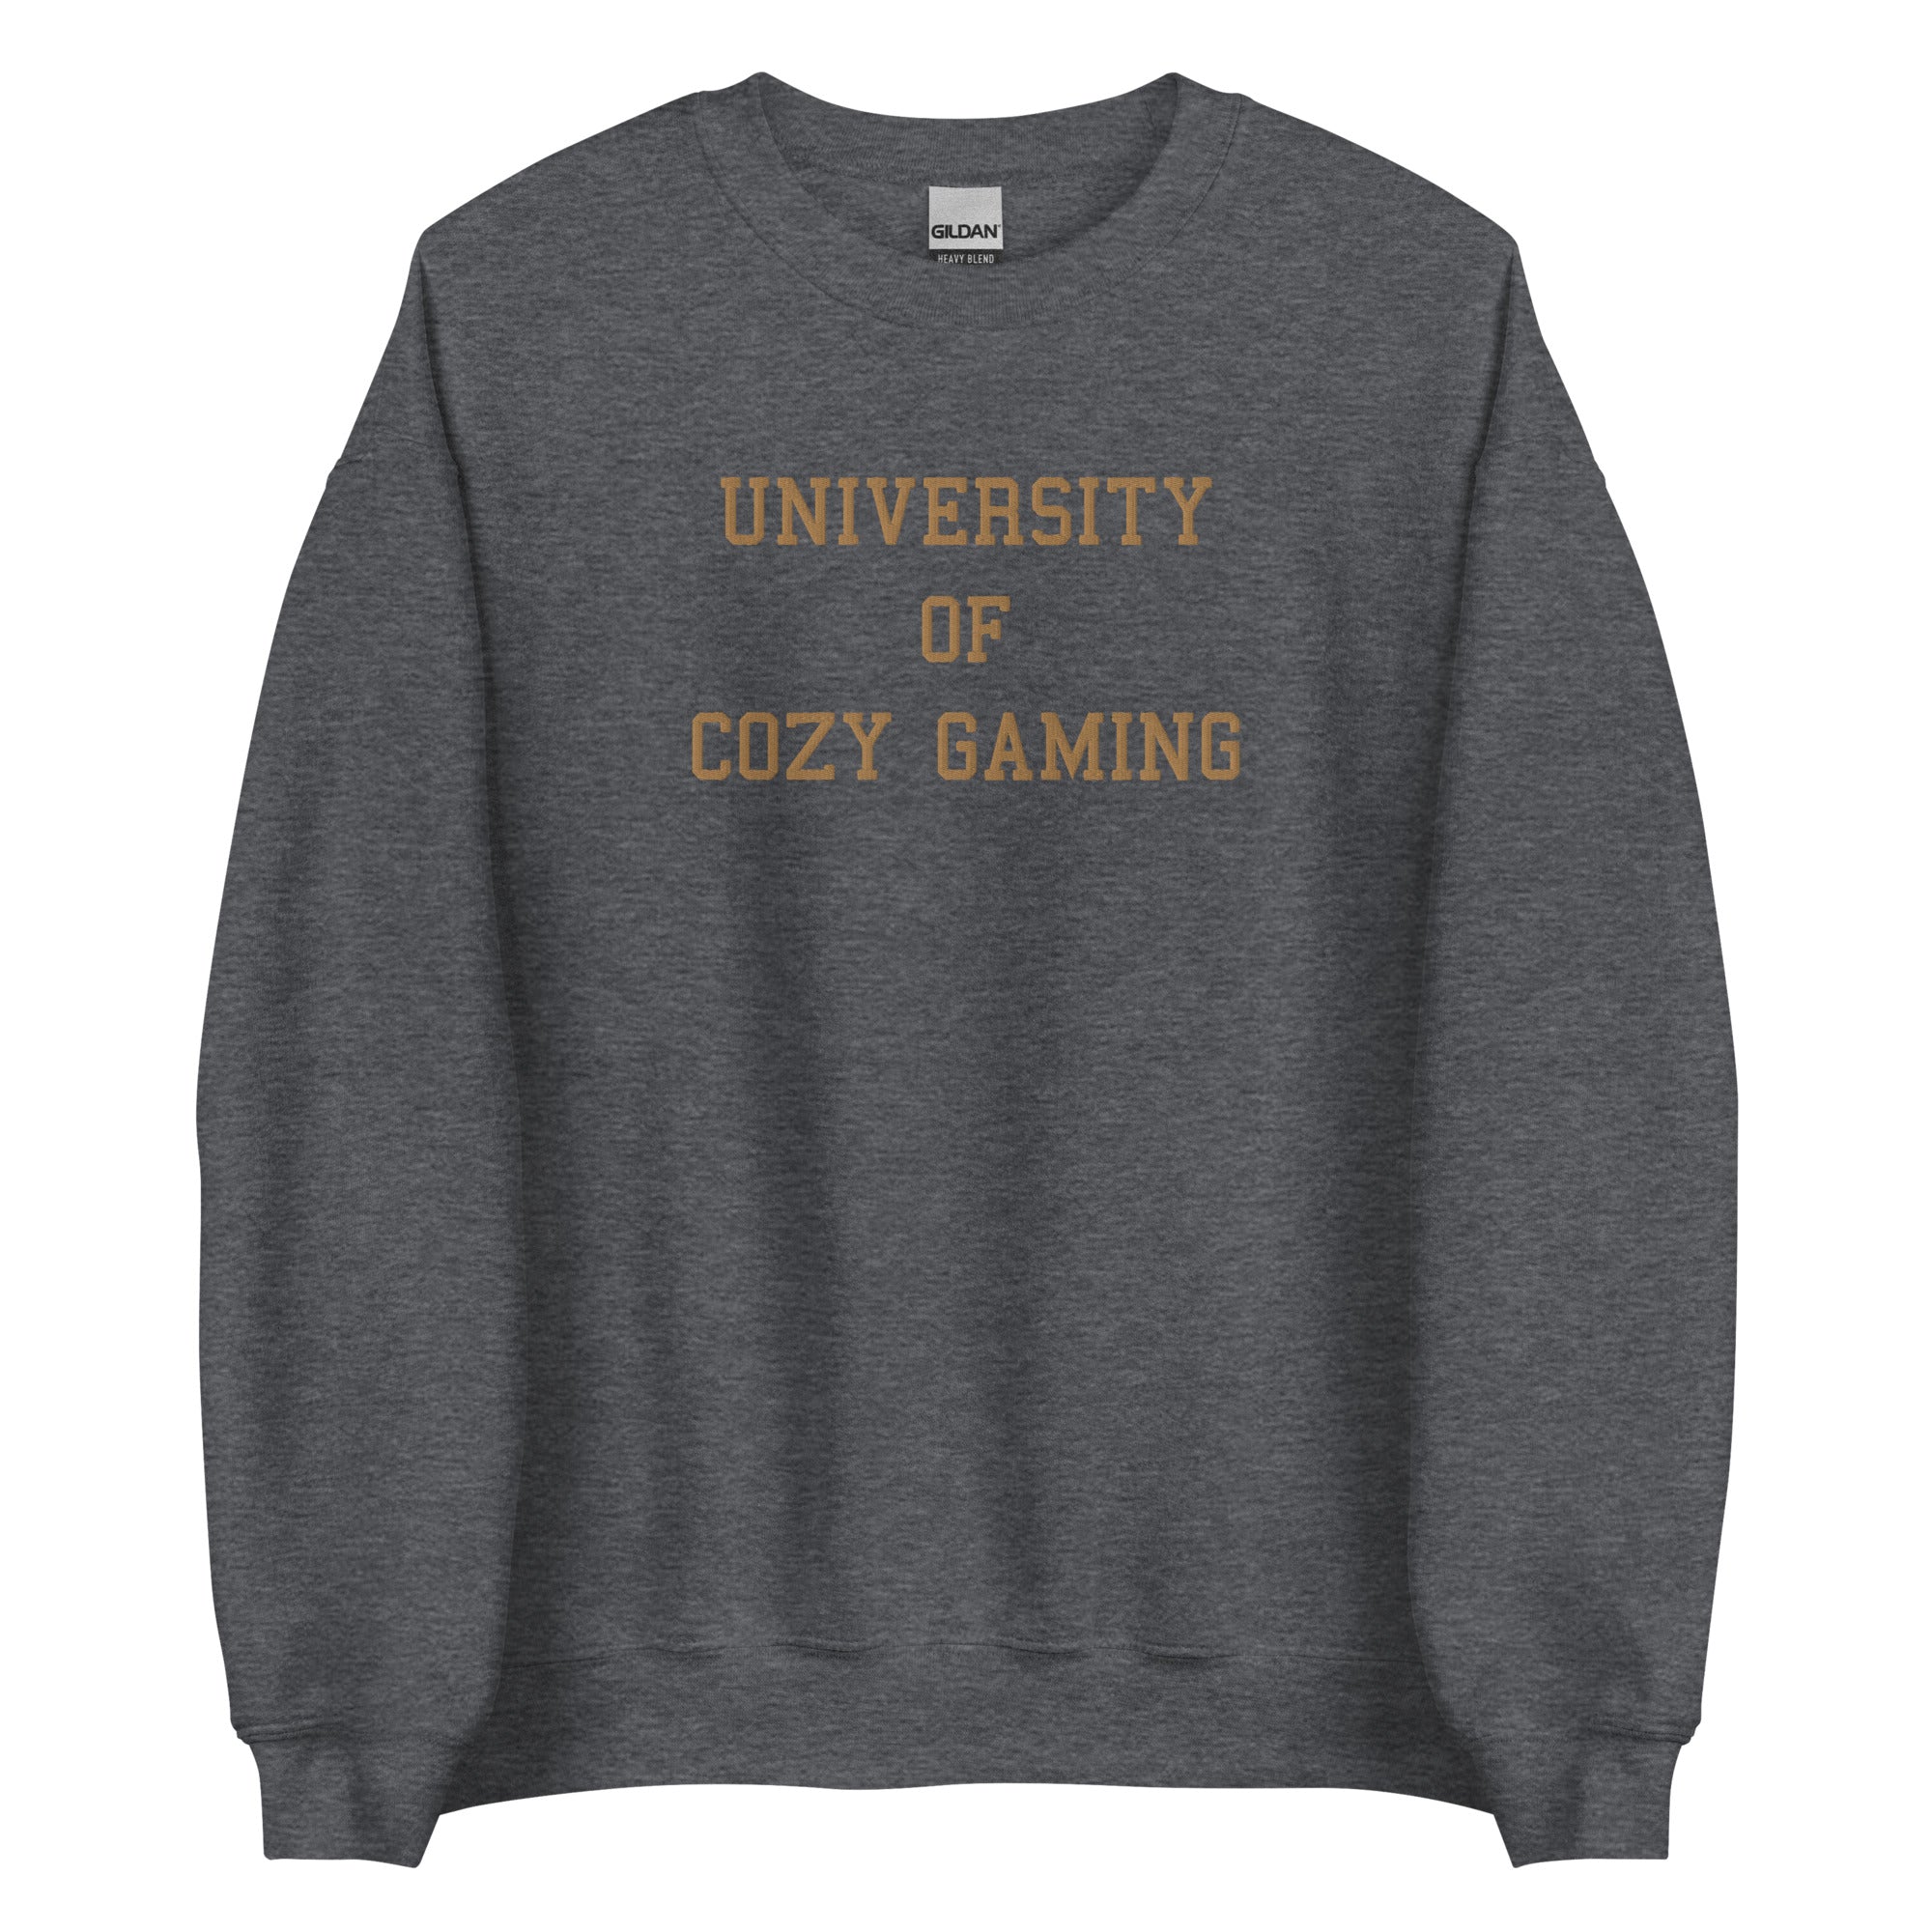 University of Cozy Gaming | Embroidered Unisex Sweatshirt | Coy Gamer Threads and Thistles Inventory Dark Heather S 